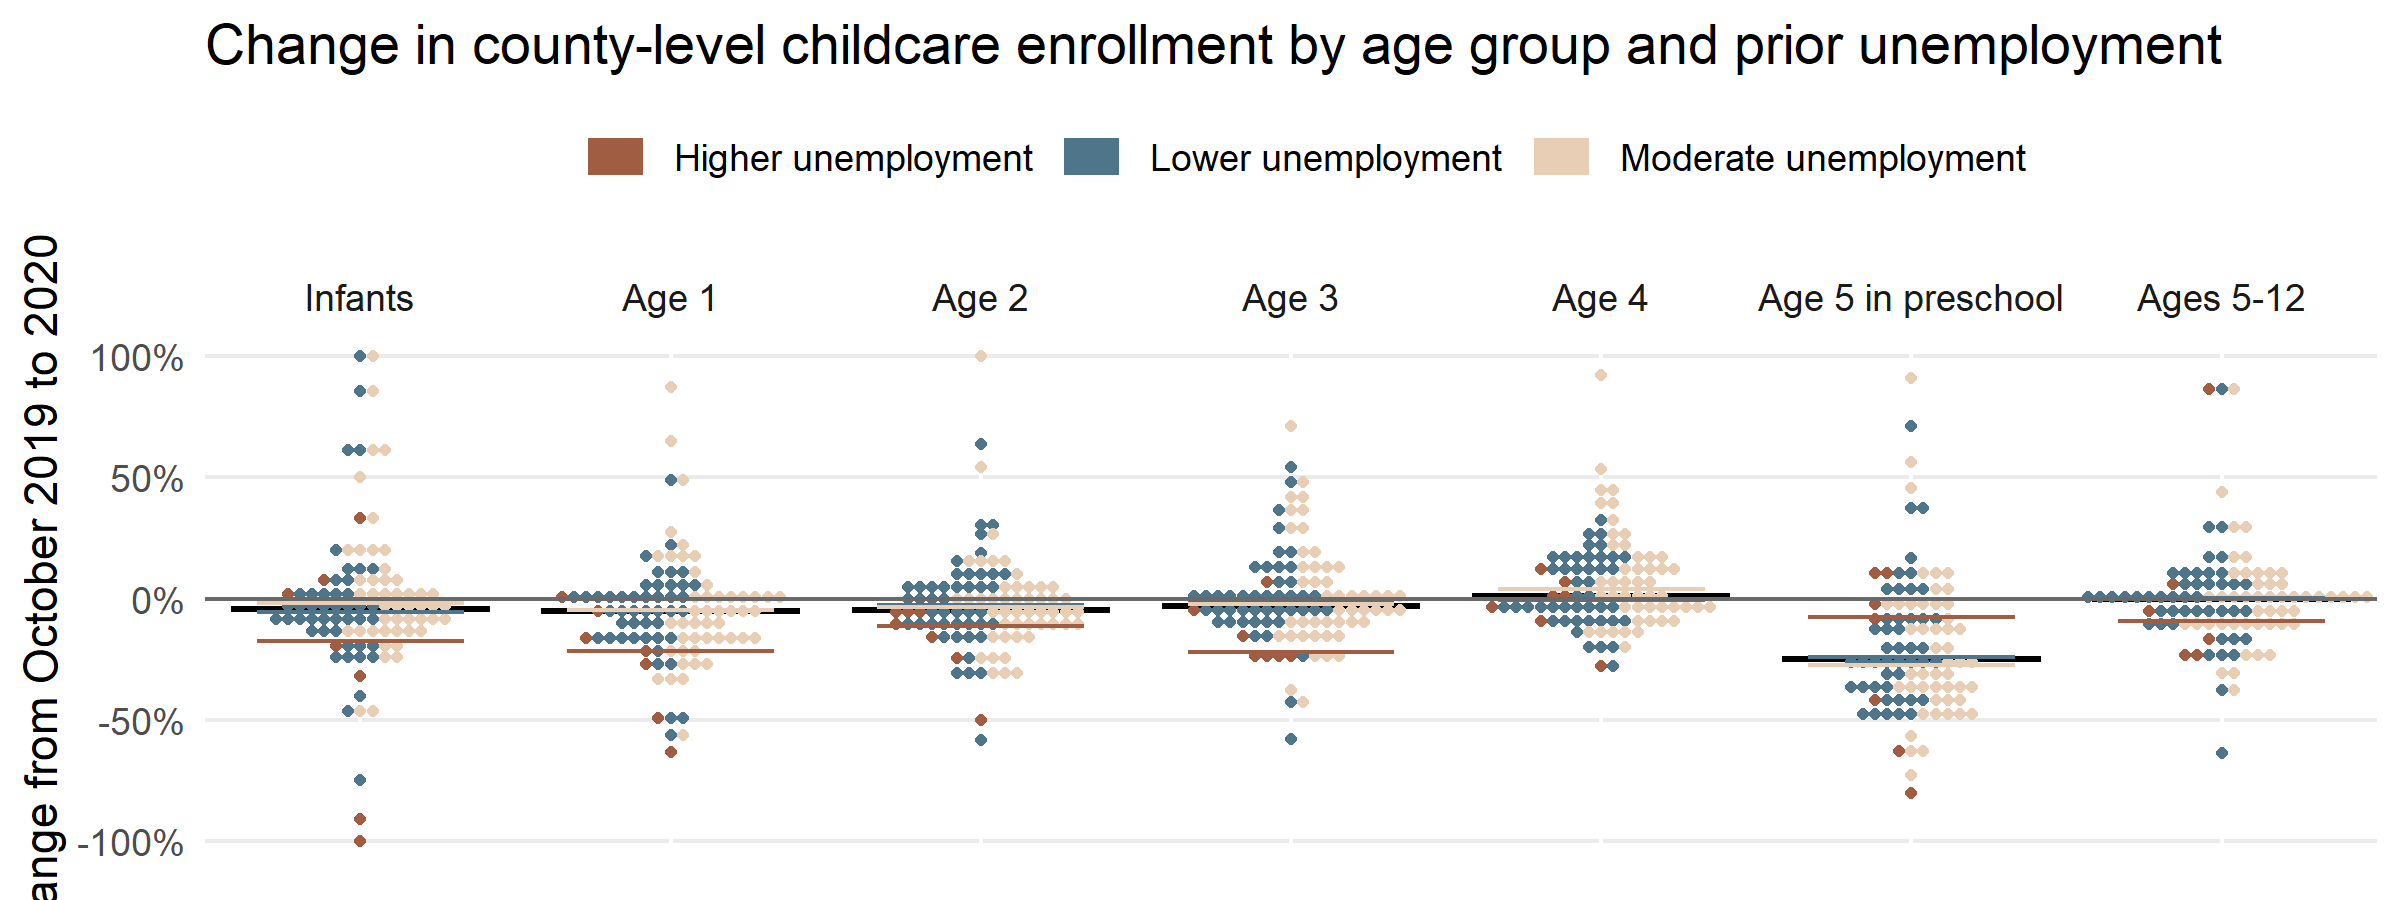 Image description: a series of dotplots with the change in enrollment by age, with each county represented by one dot per age group. The color of the counties is associated with their preexisting unemployment rate, with red for higher, yellow for moderate, and blue for lower unemployment. A median line for each color shows the trend for each age and category. High unemployment areas have the lowest median in all age categories except 5-year-olds in preschool.